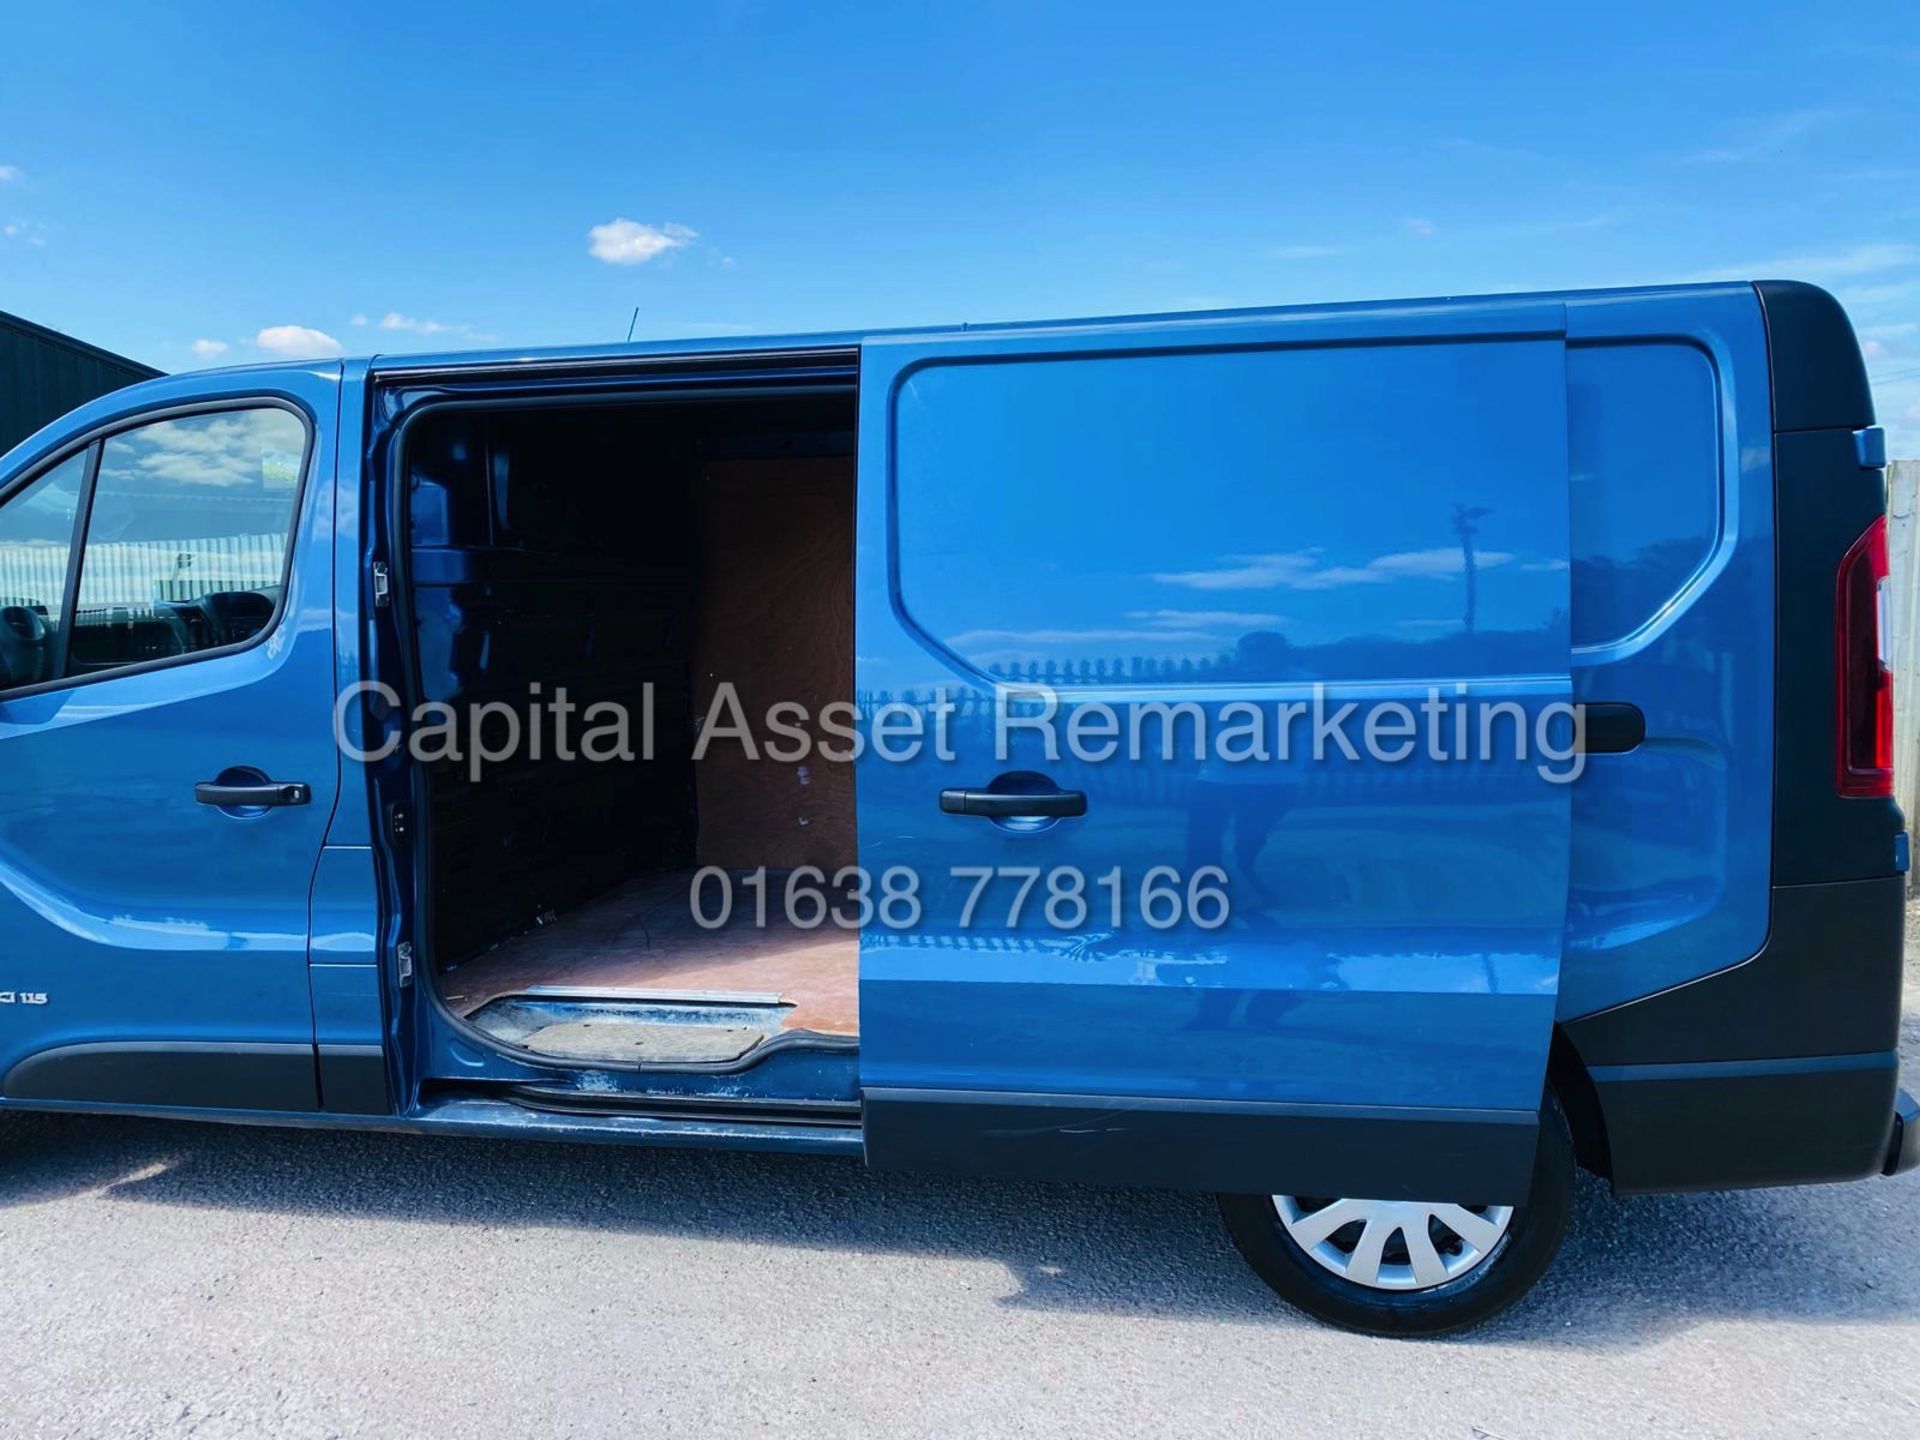 (ON SALE) RENAULT TRAFIC 1.6DCI 'BUSINESS EDITION" LWB (16 REG) AIR CON - COMFORT PACK - NO VAT!!! - Image 10 of 21